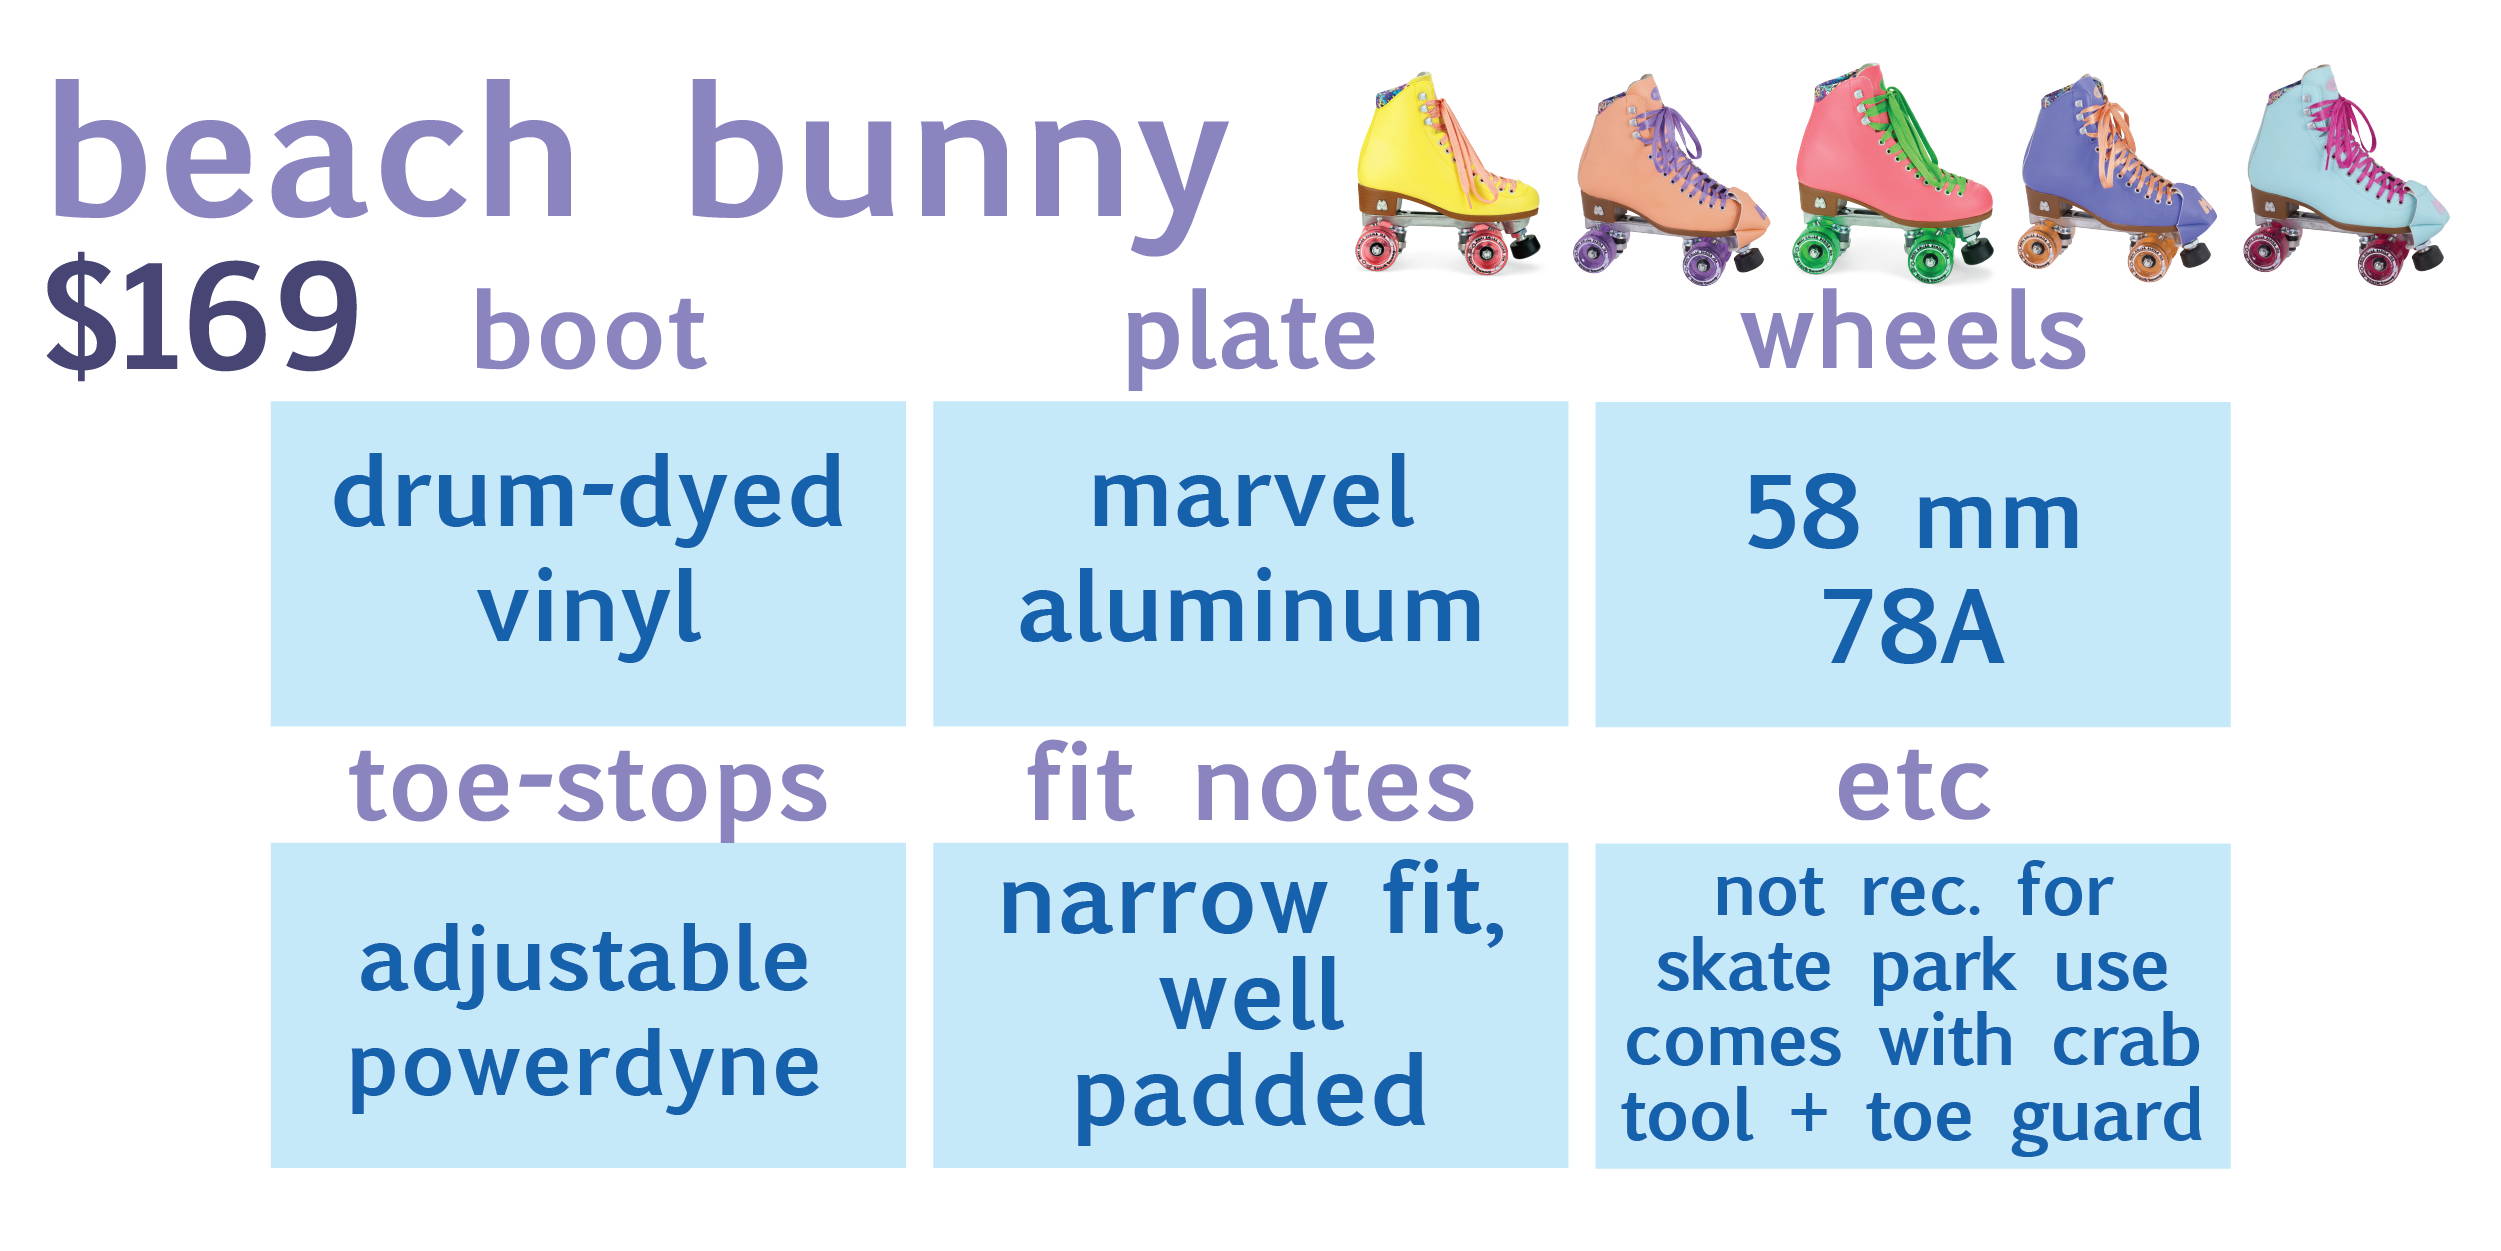 table of beach bunny information with photo of yellow beach bunny:  boot: drum dyed vinyl, plate: marvel aluminum, wheels: 58mm, 78A, toe-stops: adjustable powerdyne, fit notes: narrow fit, well padded